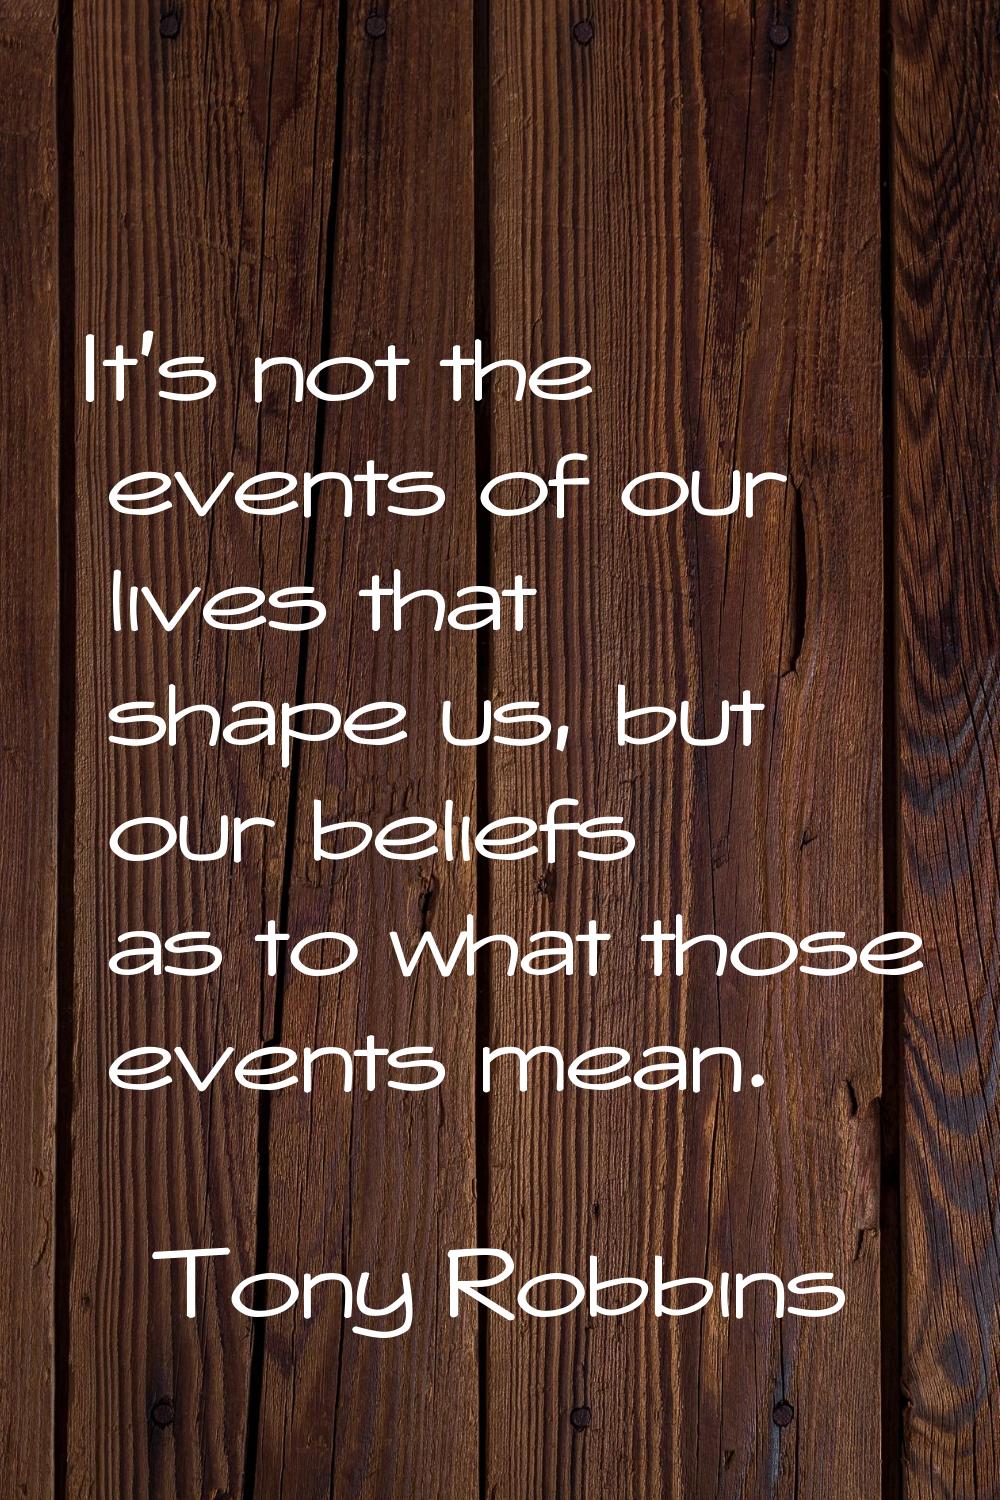 It's not the events of our lives that shape us, but our beliefs as to what those events mean.